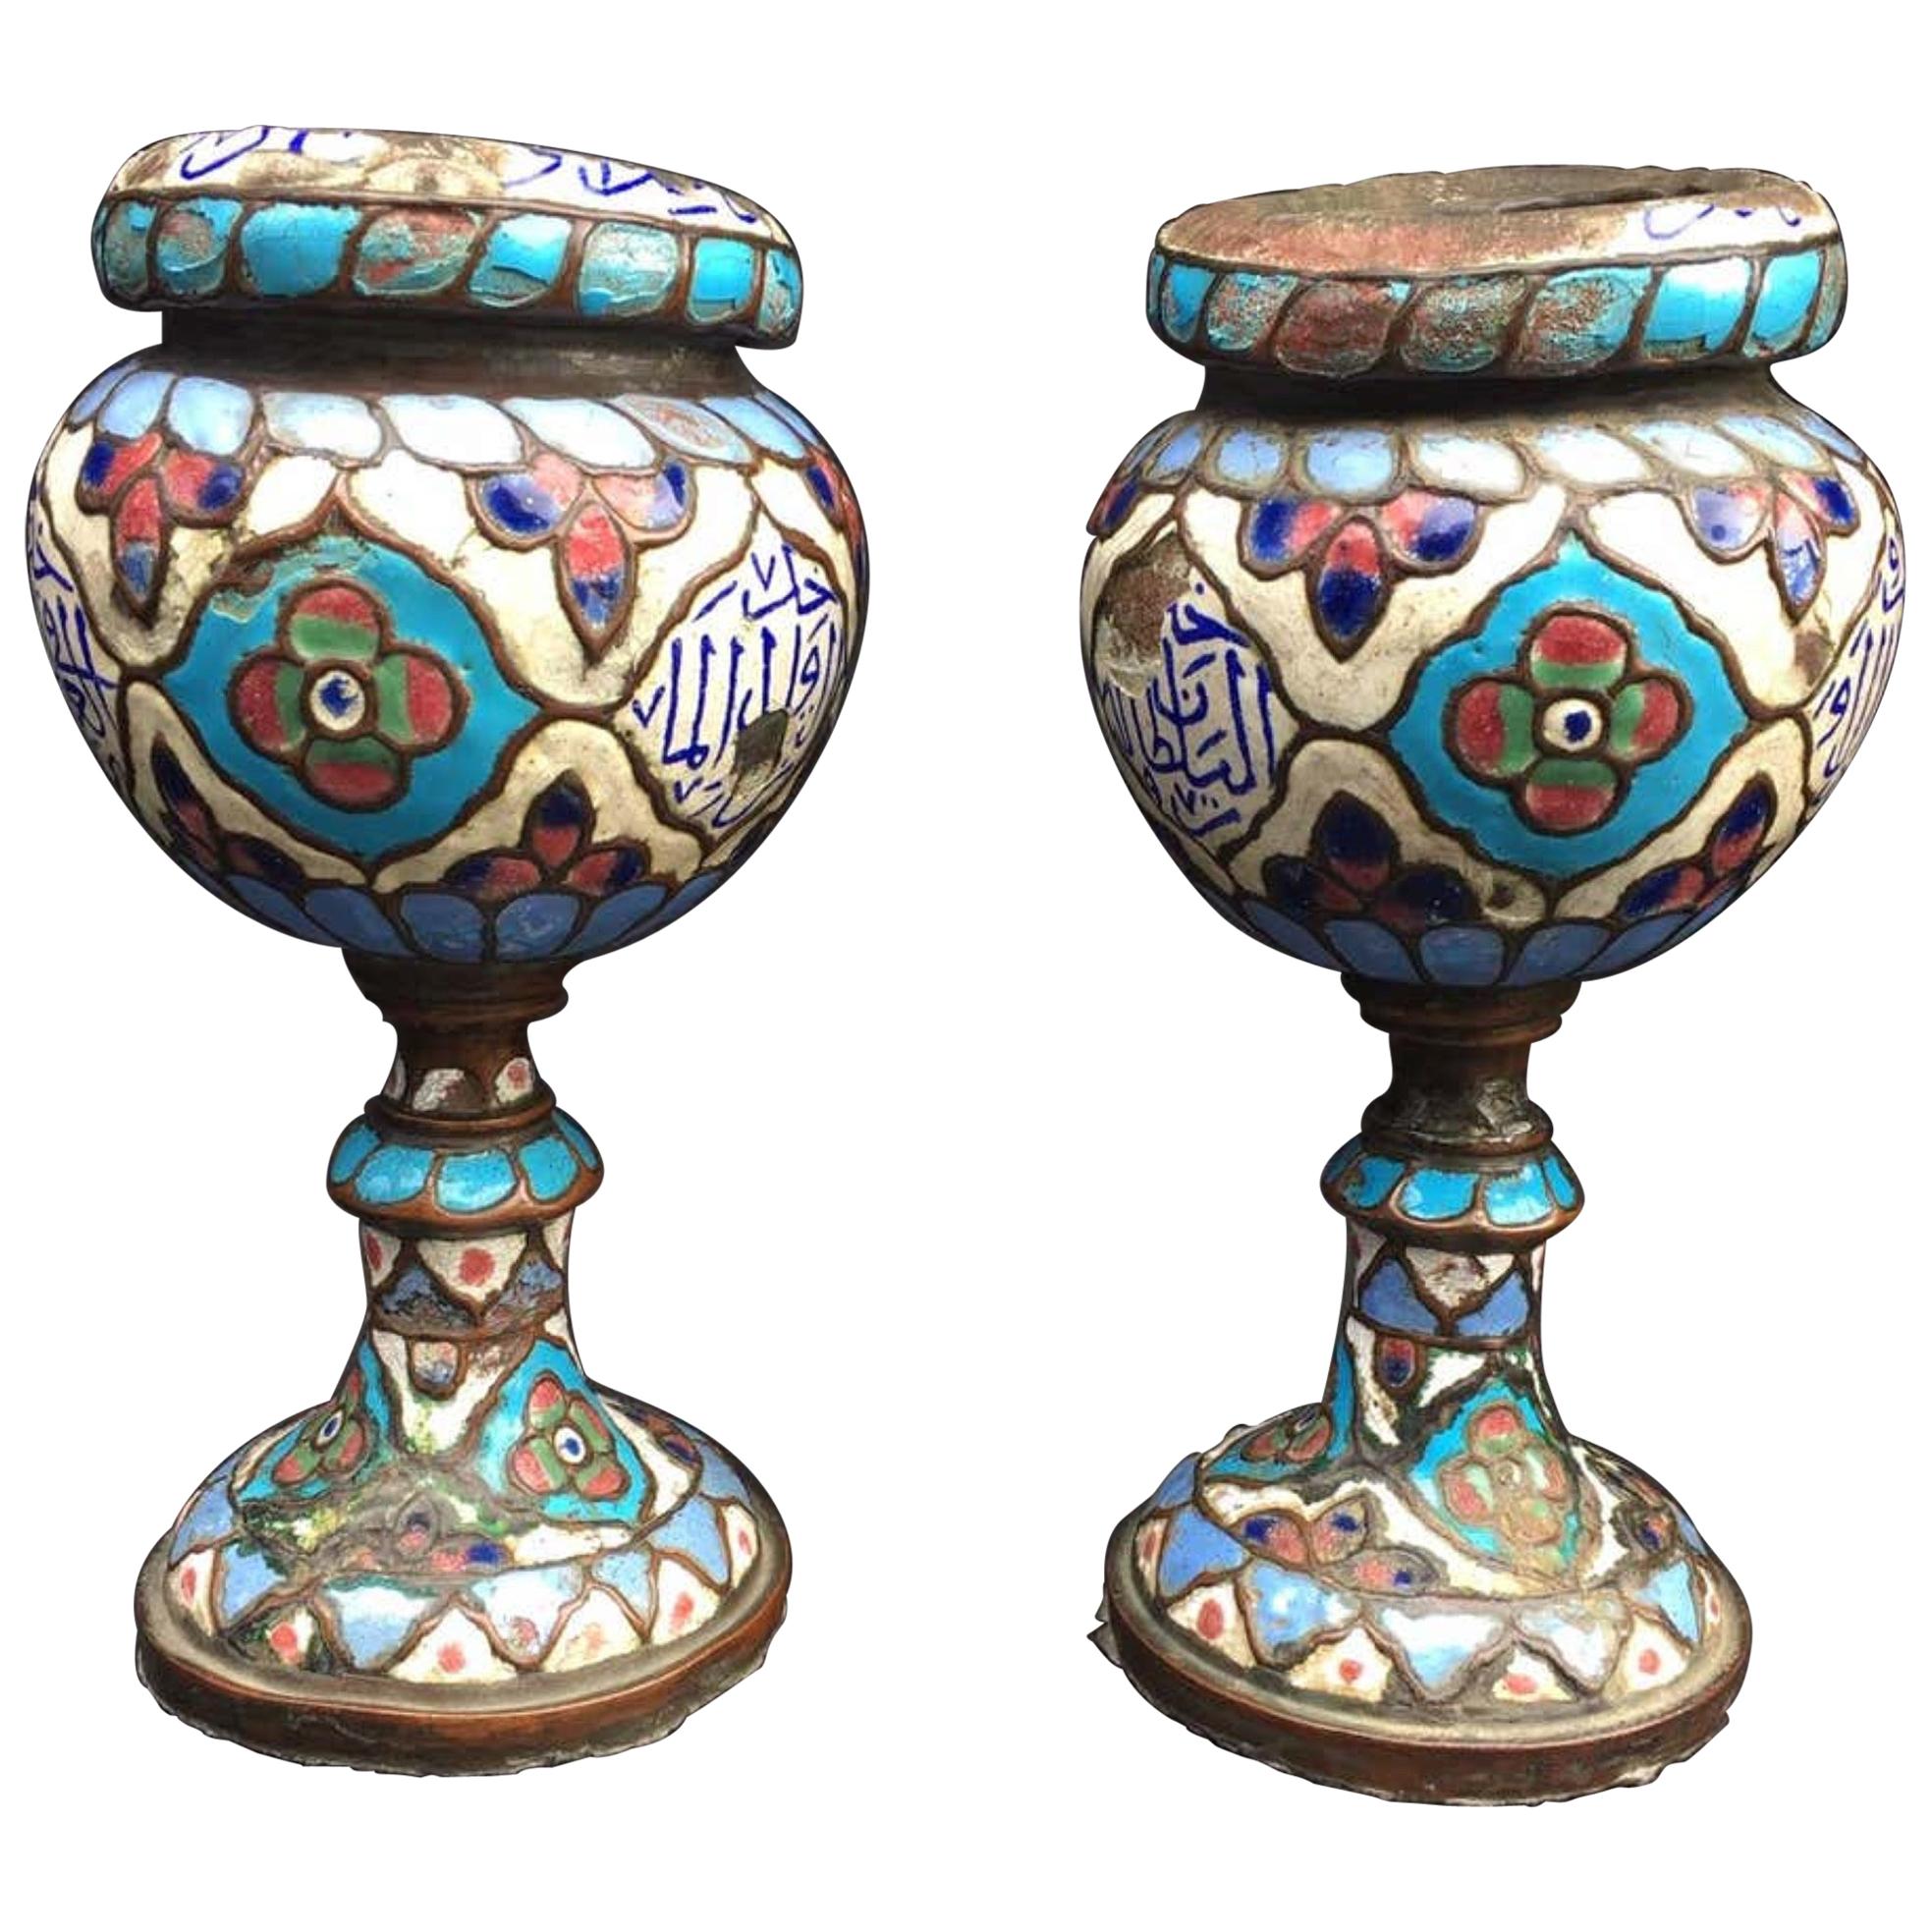 Pair of Islamic Enameled Vessels, Ancient Urns For Sale